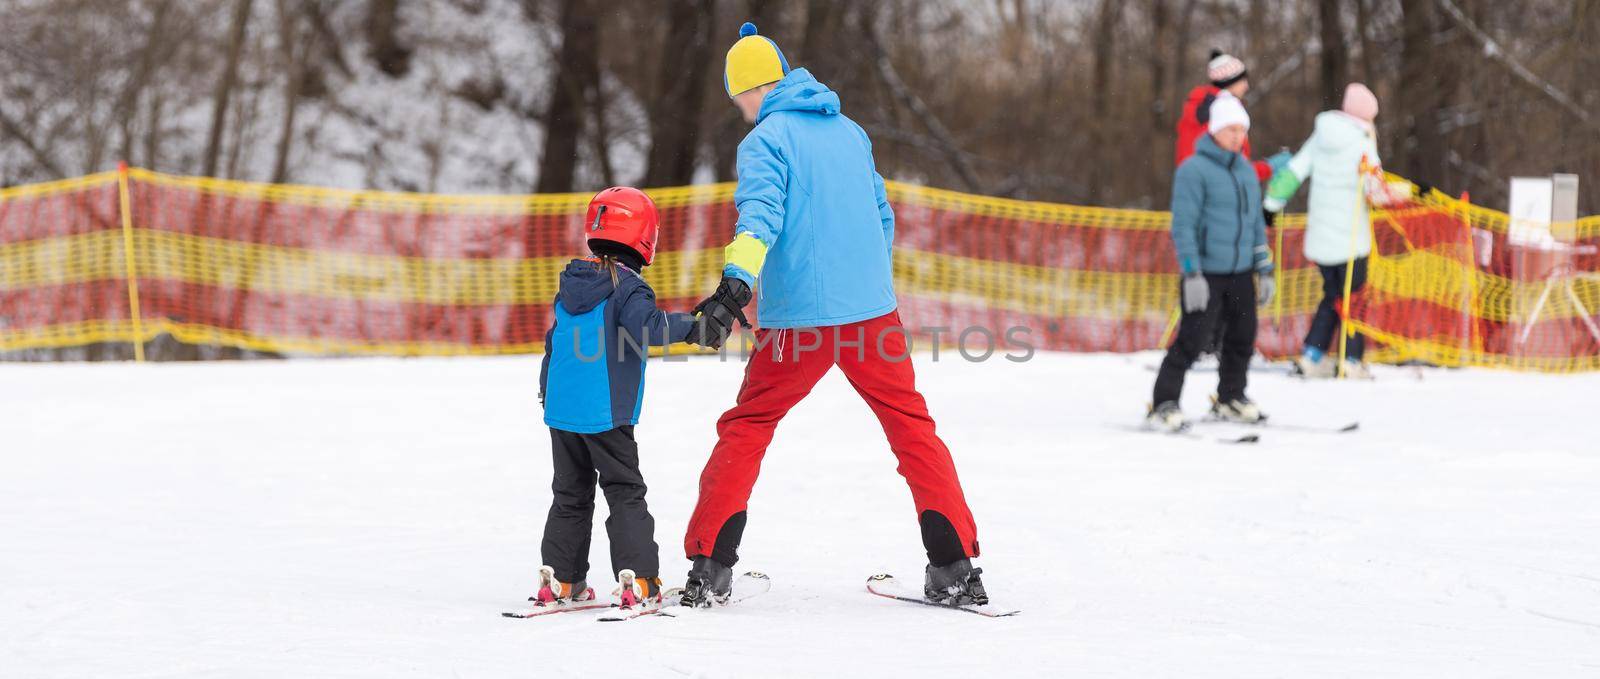 skiing master class for kids with instructor in winter sports school for children